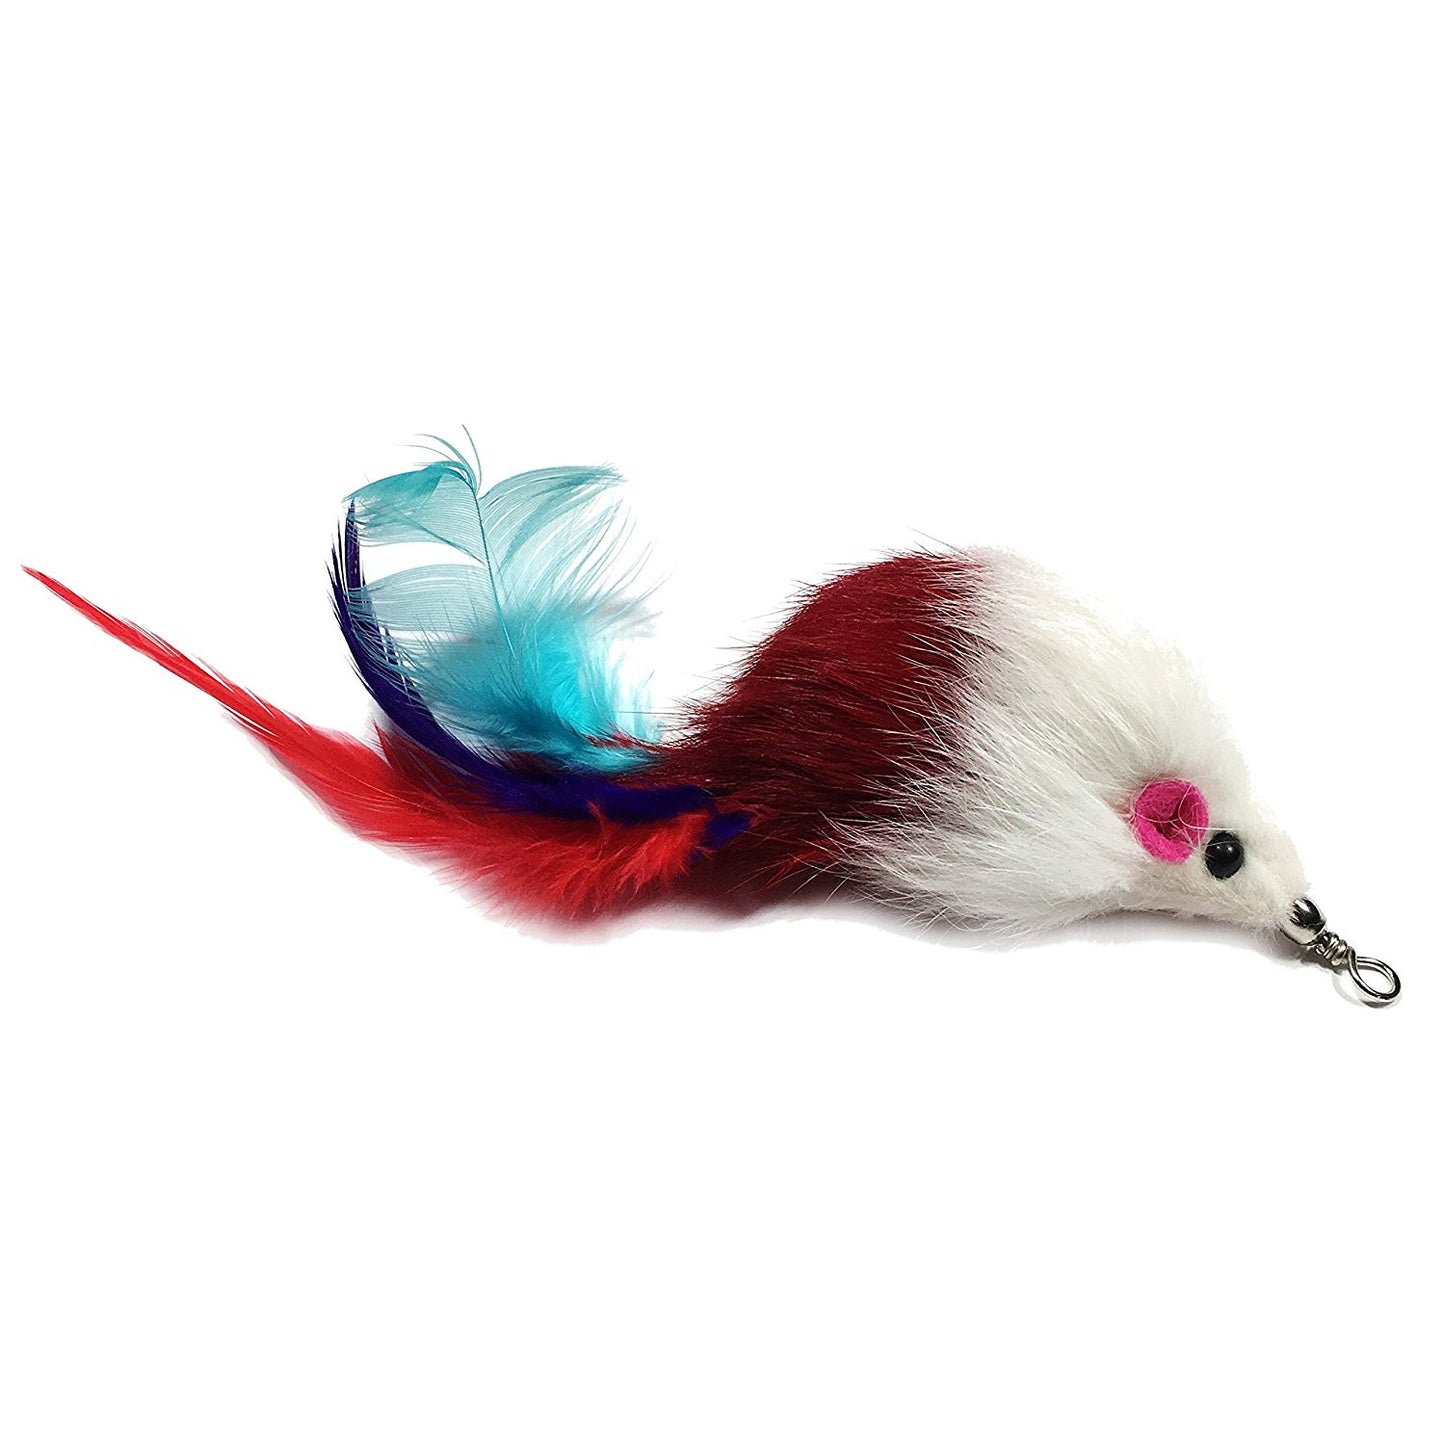 Cat Wand Attachments - 4 Feathers, 1 Mouse, 1 Worm